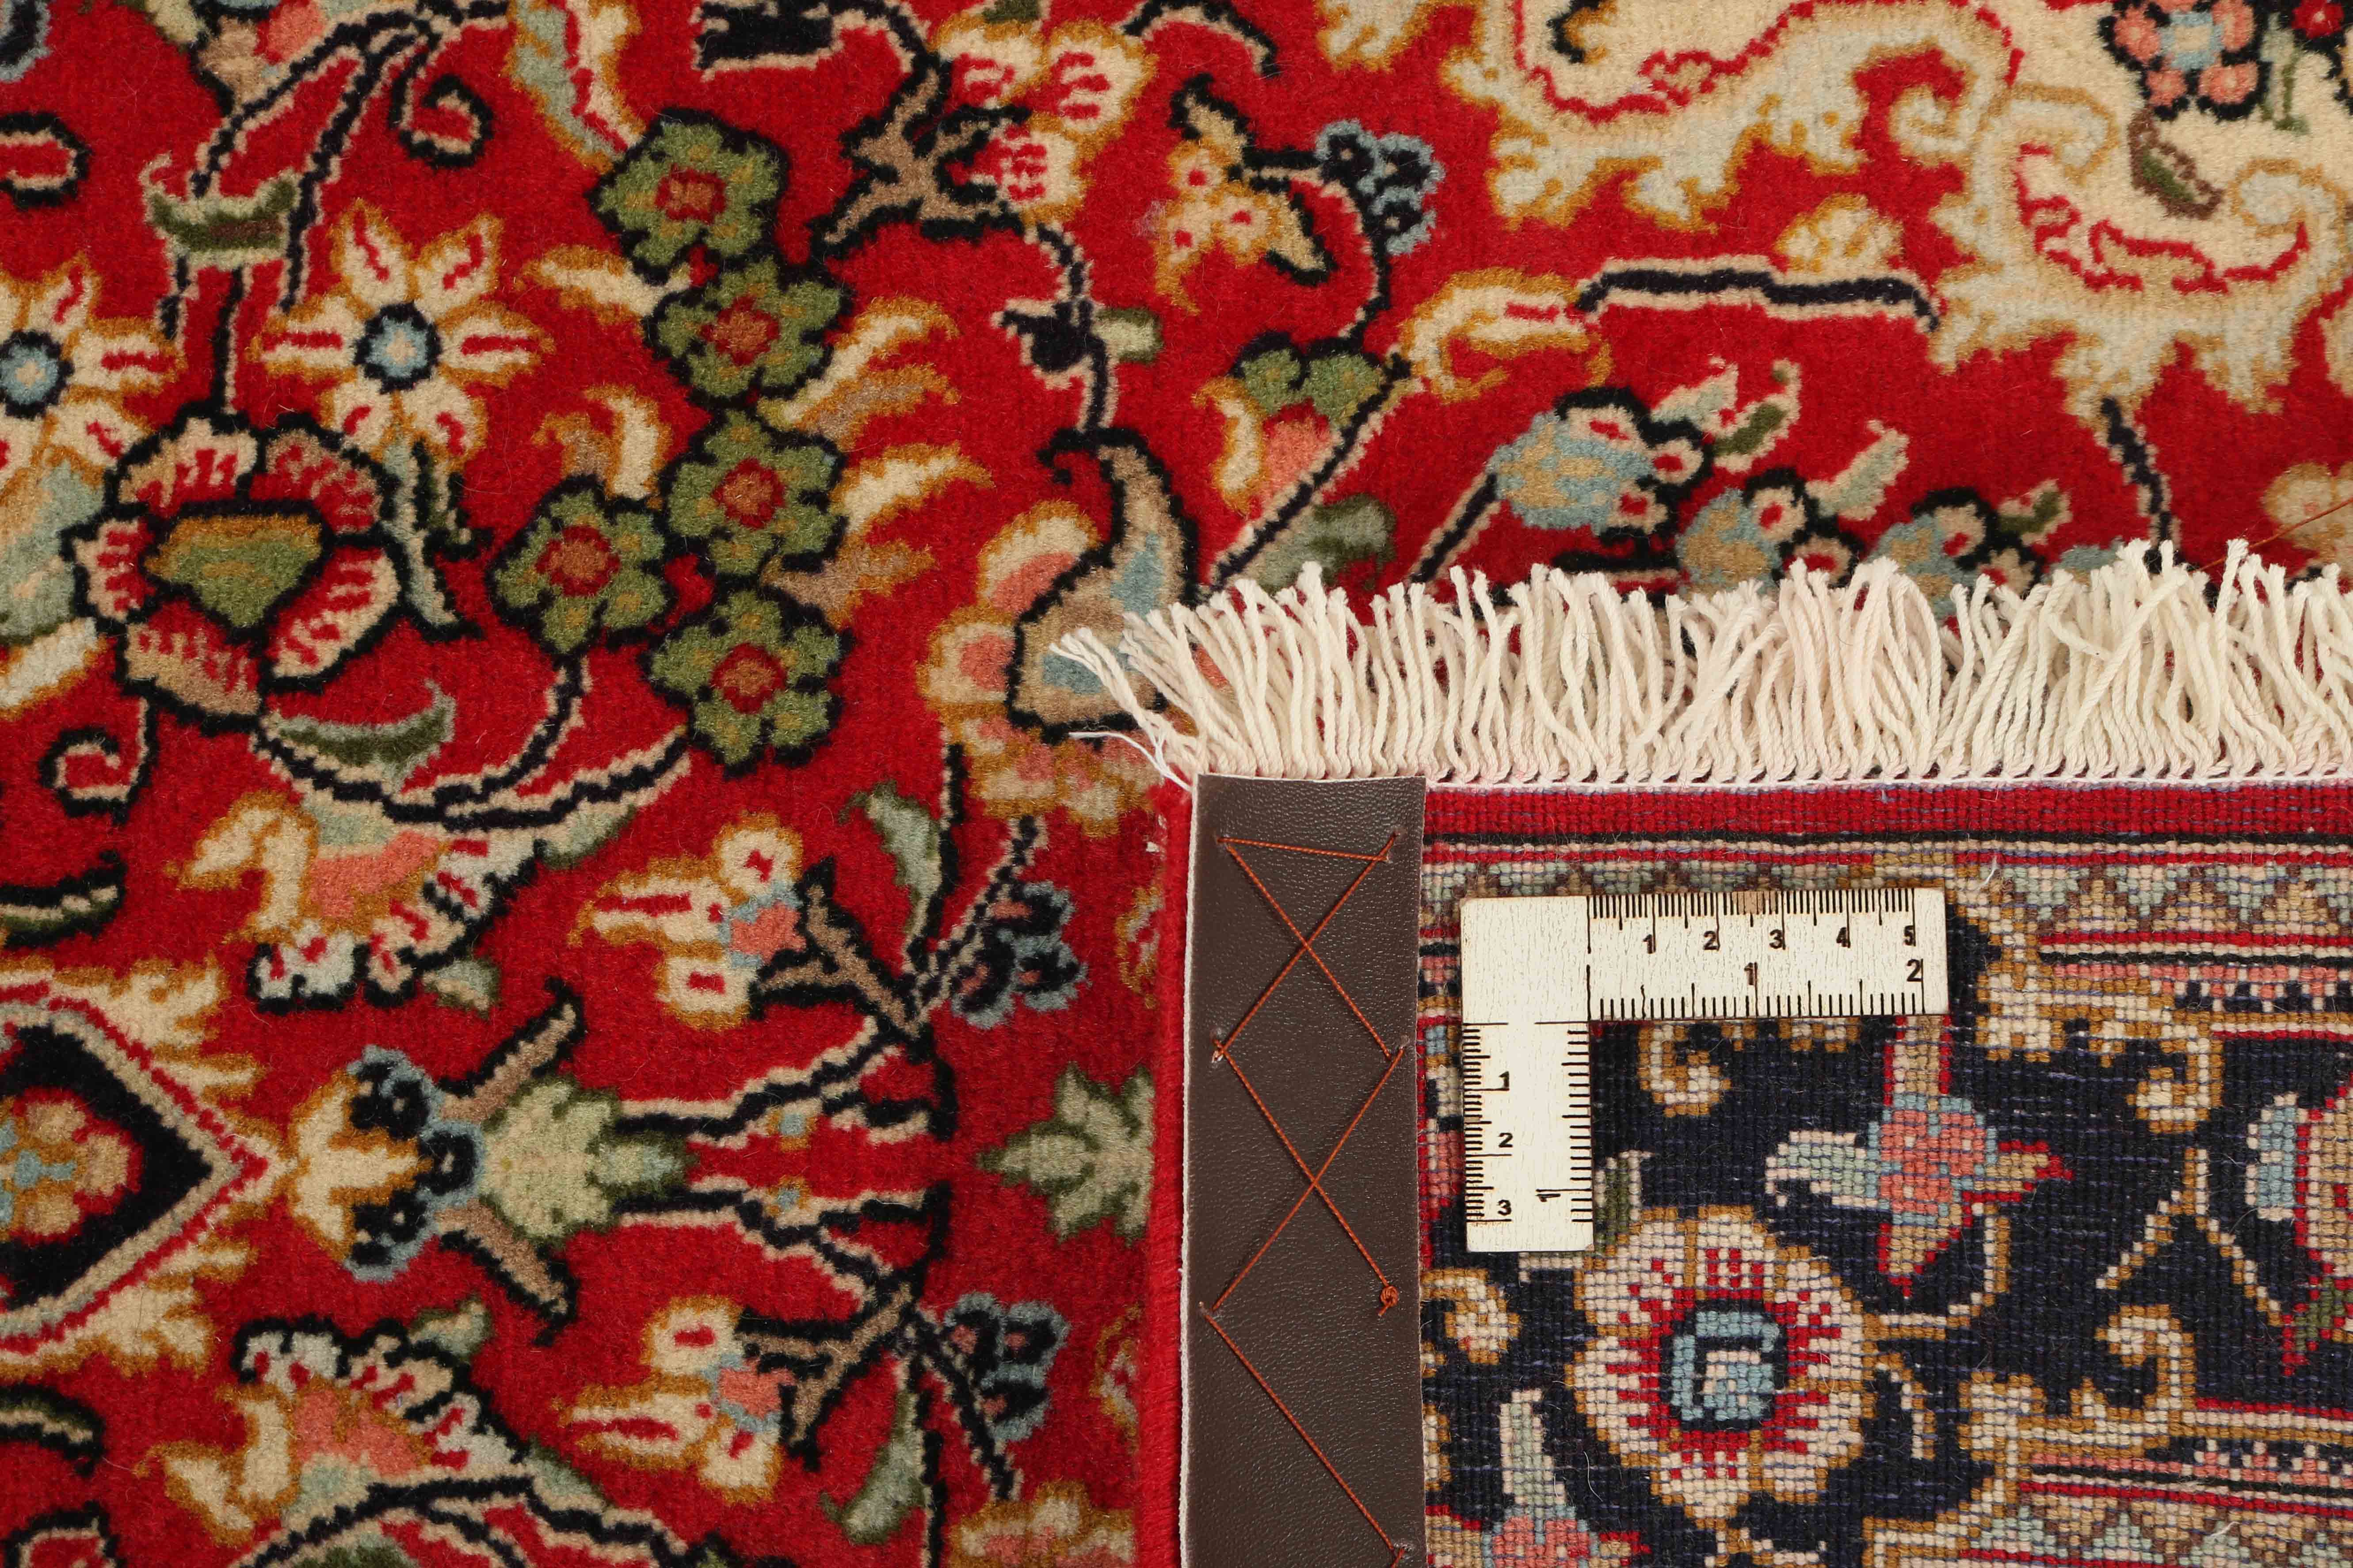 Authentic persian runner with a traditional floral design in red and beige